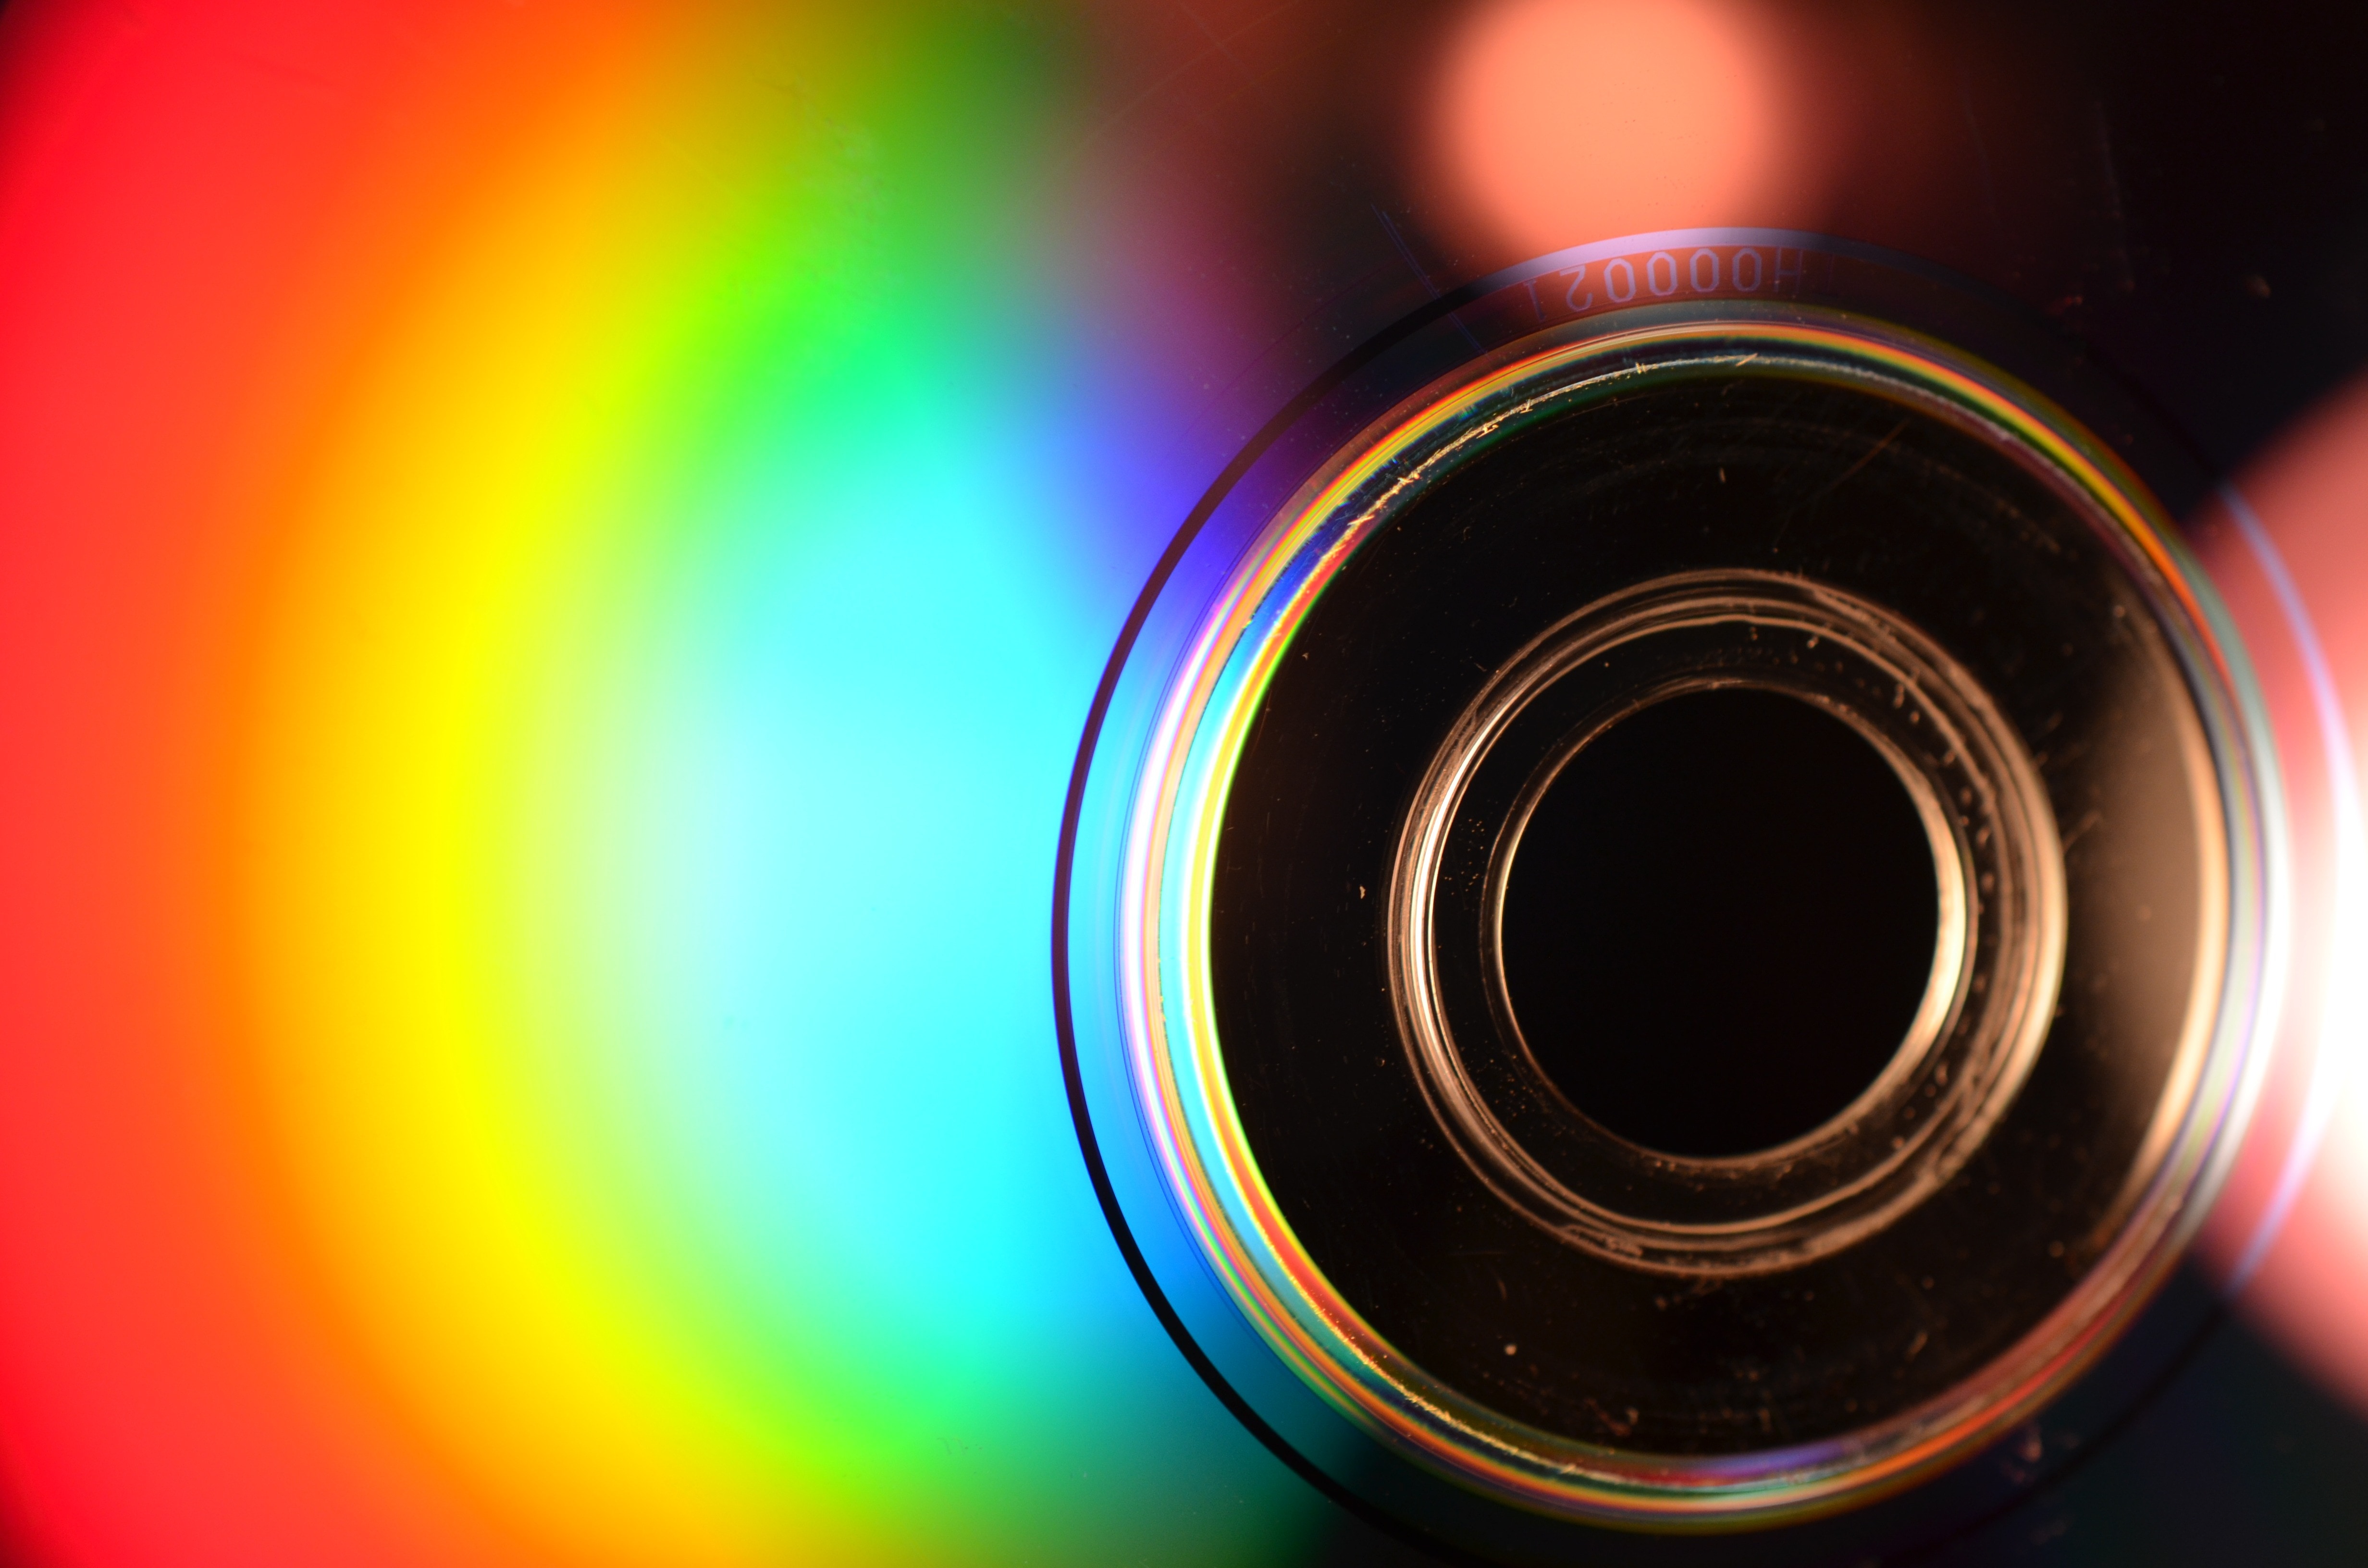 compact disc close up photography